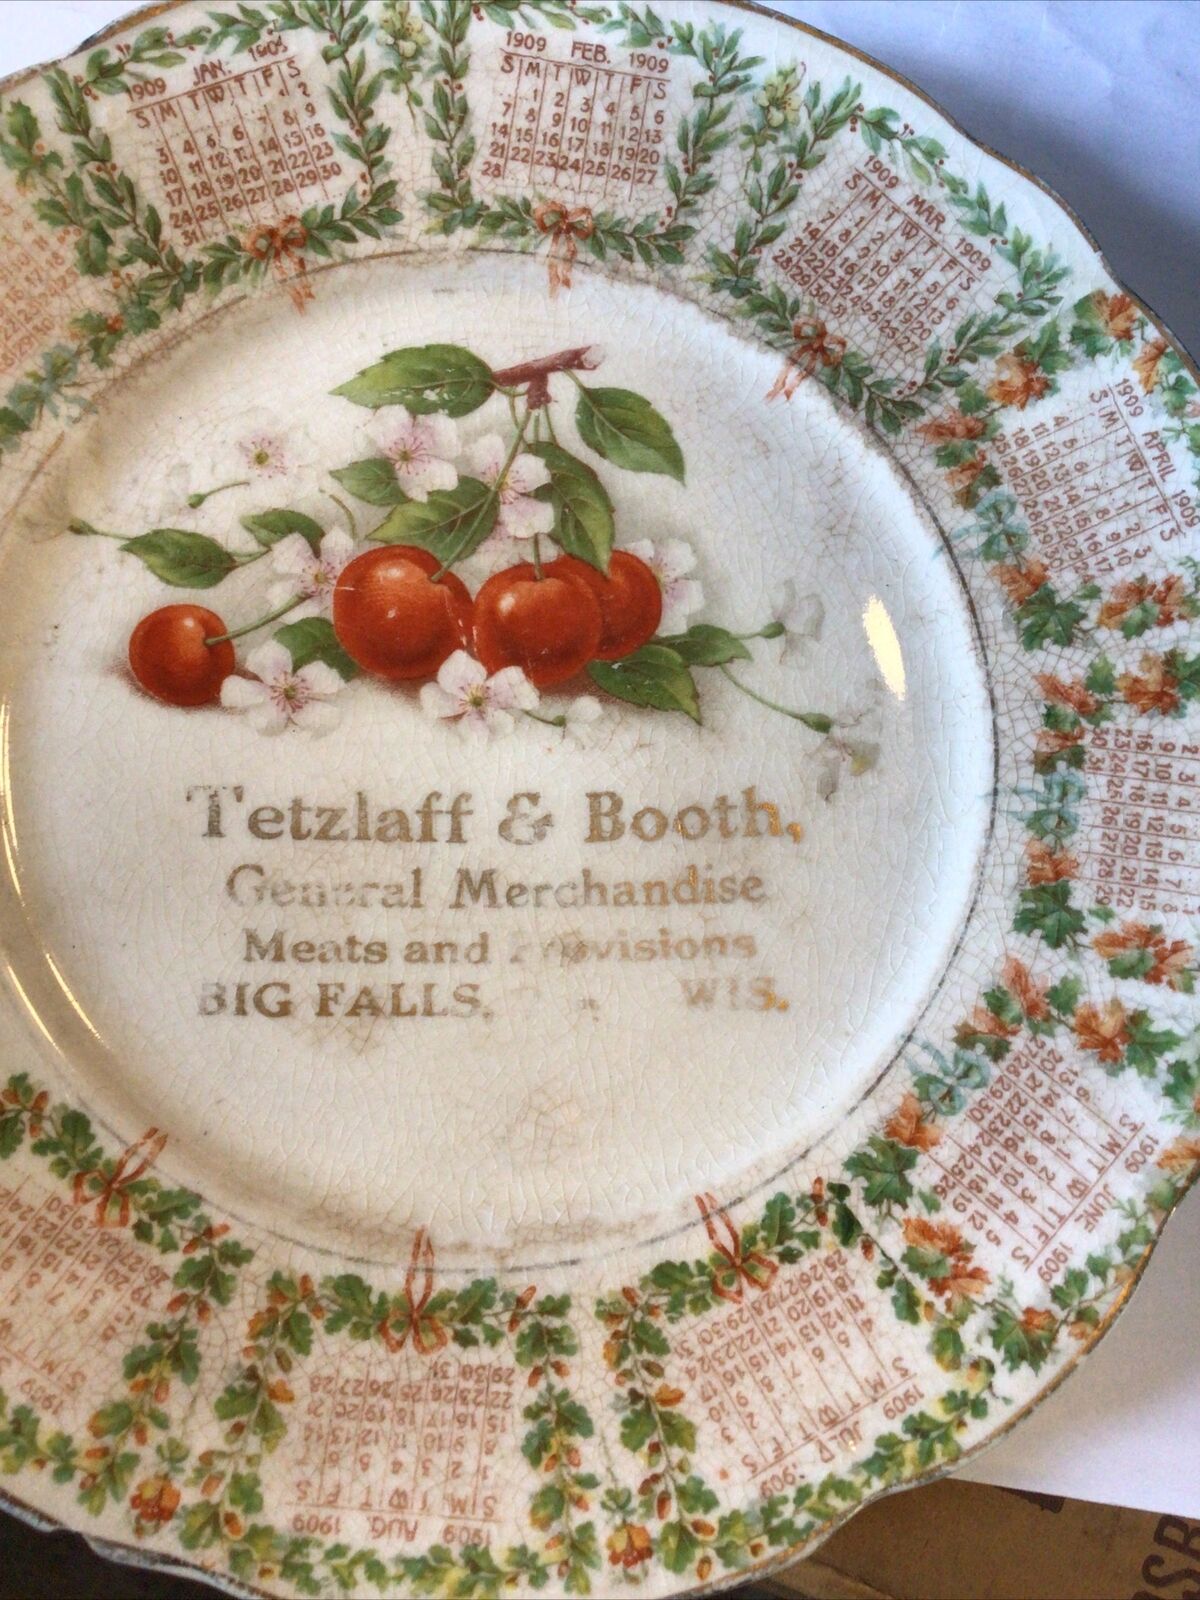 BIG FALLS WISCONSIN PLATE TEZTLAFF BOOTH 1909 Calendar  Meats WI WIS ADVERTISING